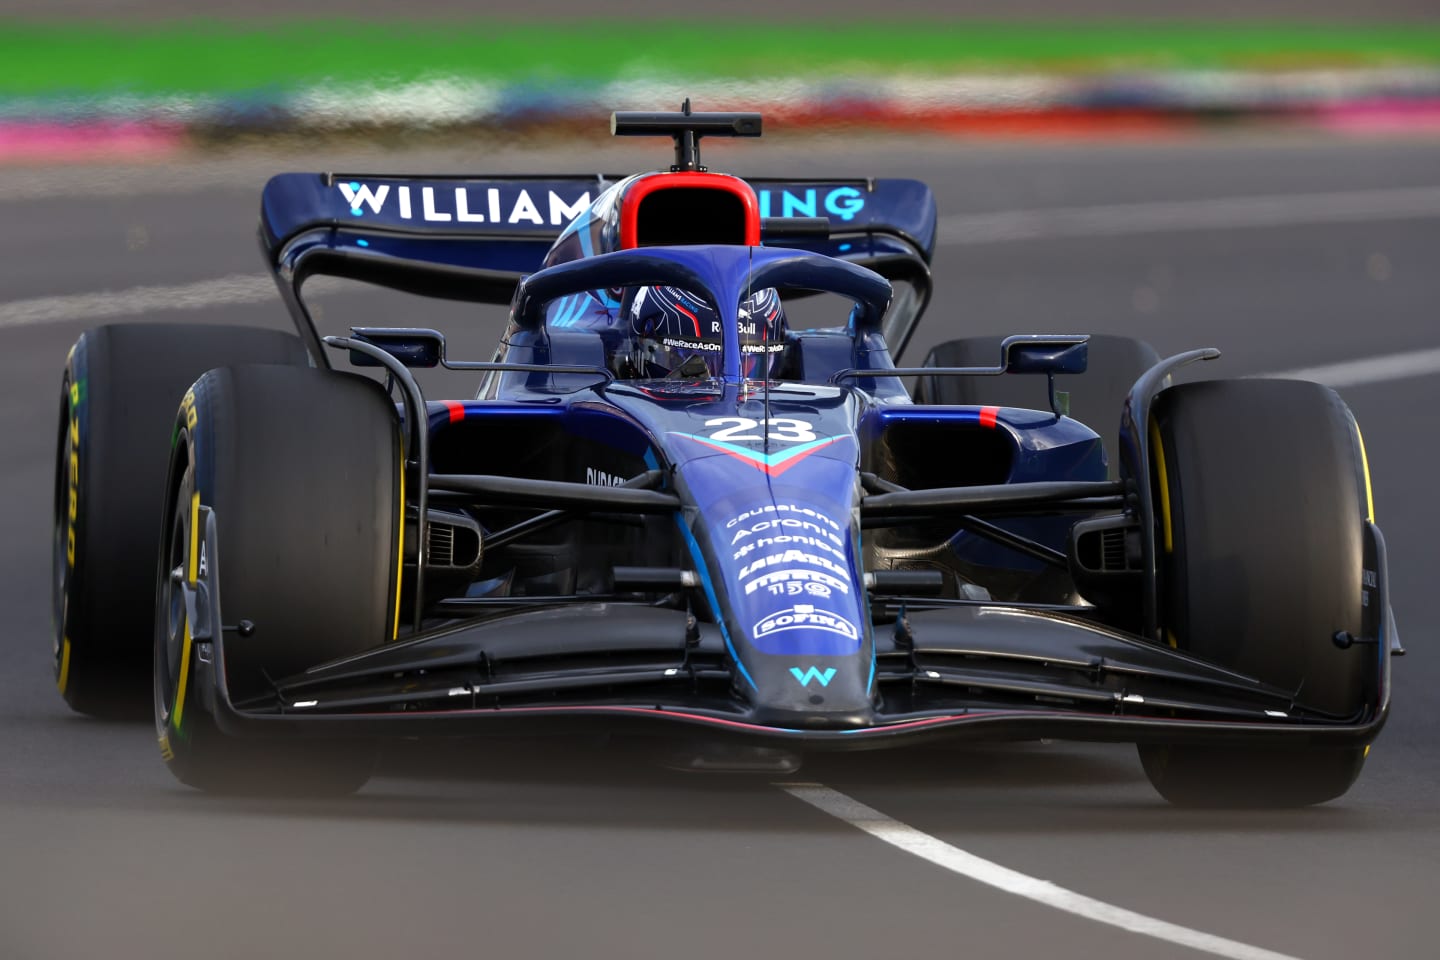 MELBOURNE, AUSTRALIA - APRIL 08: Alexander Albon of Thailand driving the (23) Williams FW44 Mercedes on track during practice ahead of the F1 Grand Prix of Australia at Melbourne Grand Prix Circuit on April 08, 2022 in Melbourne, Australia. (Photo by Bryn Lennon - Formula 1/Formula 1 via Getty Images)